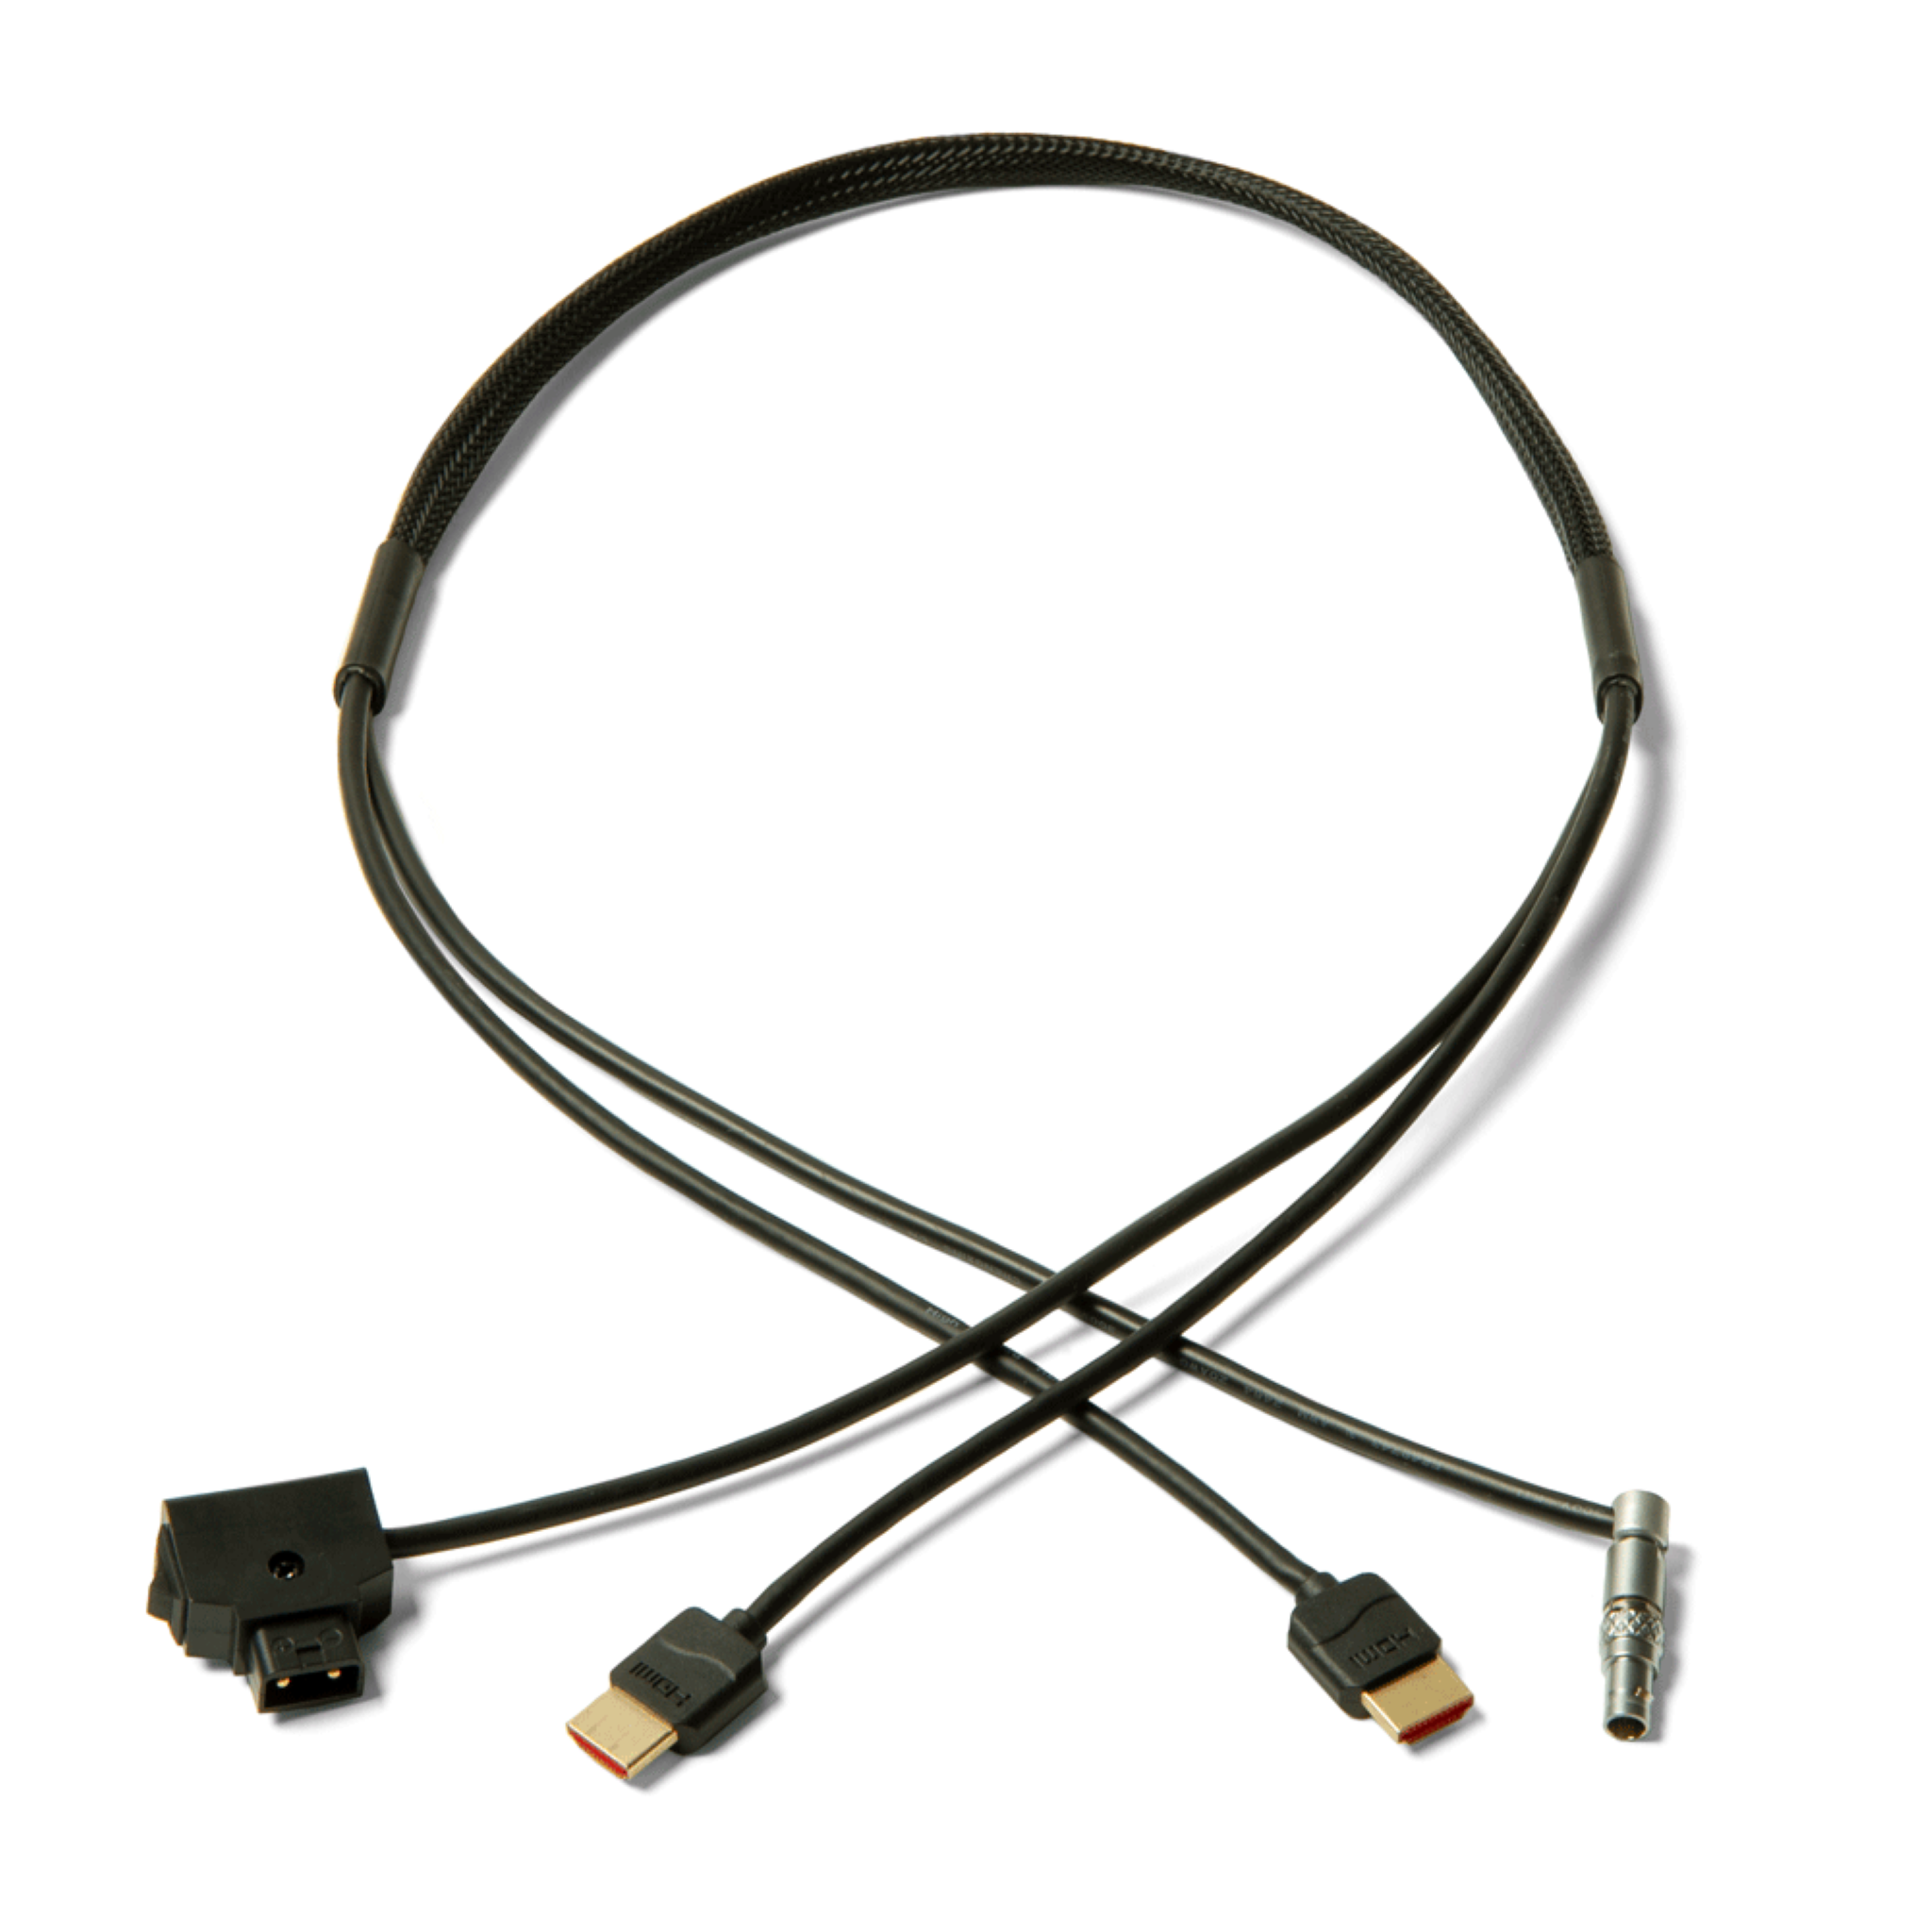 4 Pin Lemo Compatible Power and HDMI Video Cable with Power Switch